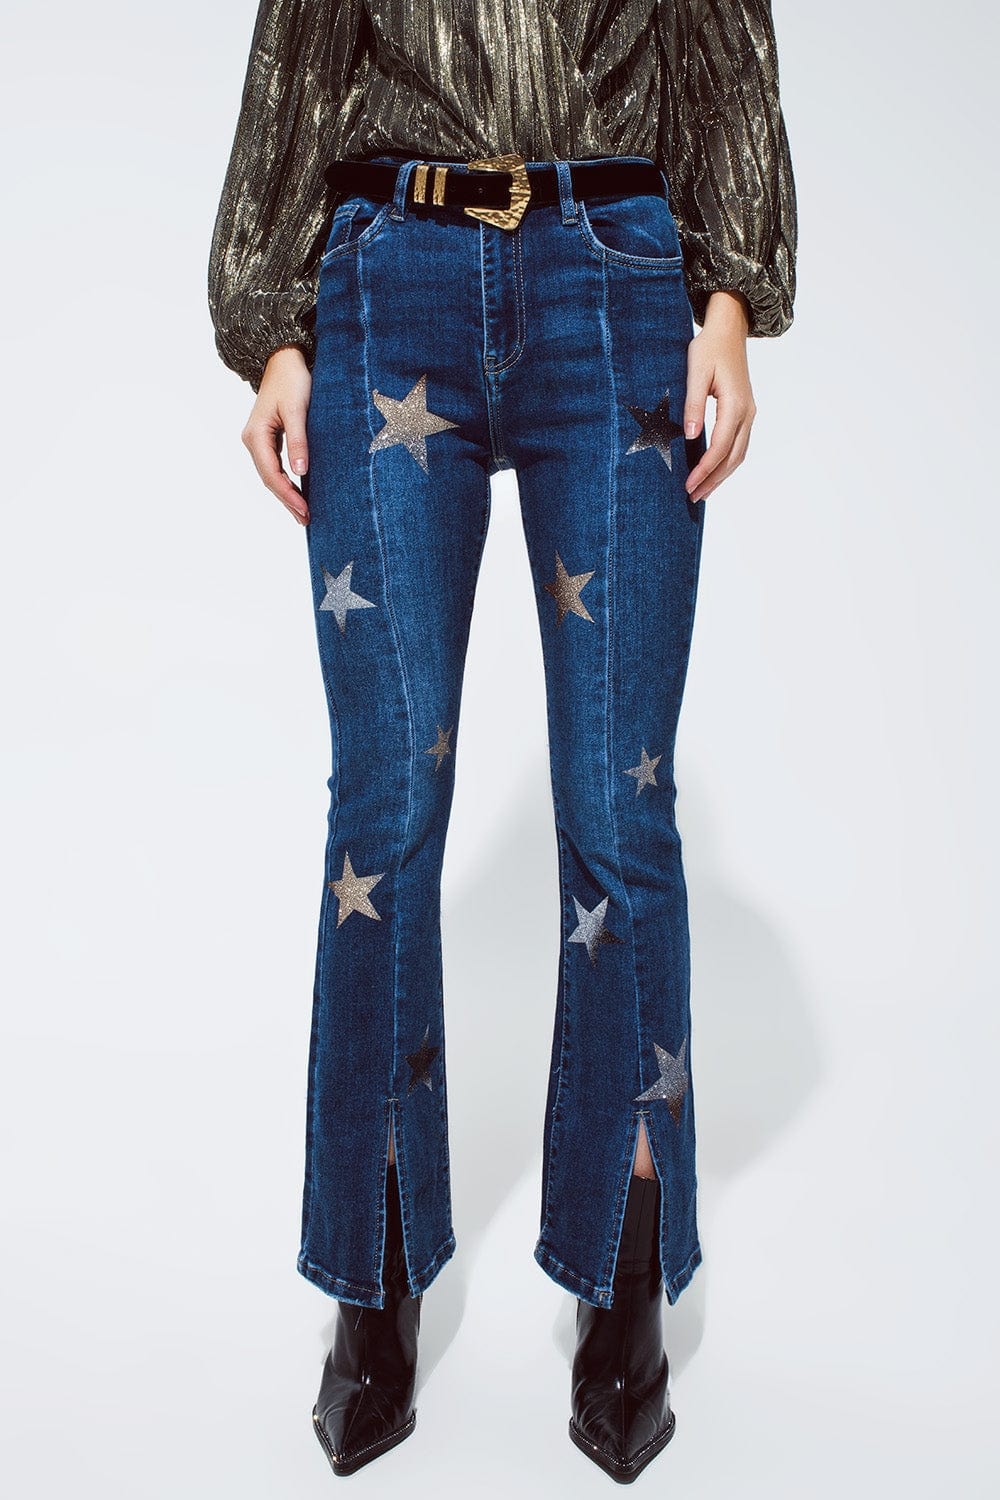 Q2 Women's Jean Flared Jeans With Shiny Stars Detail In Blue